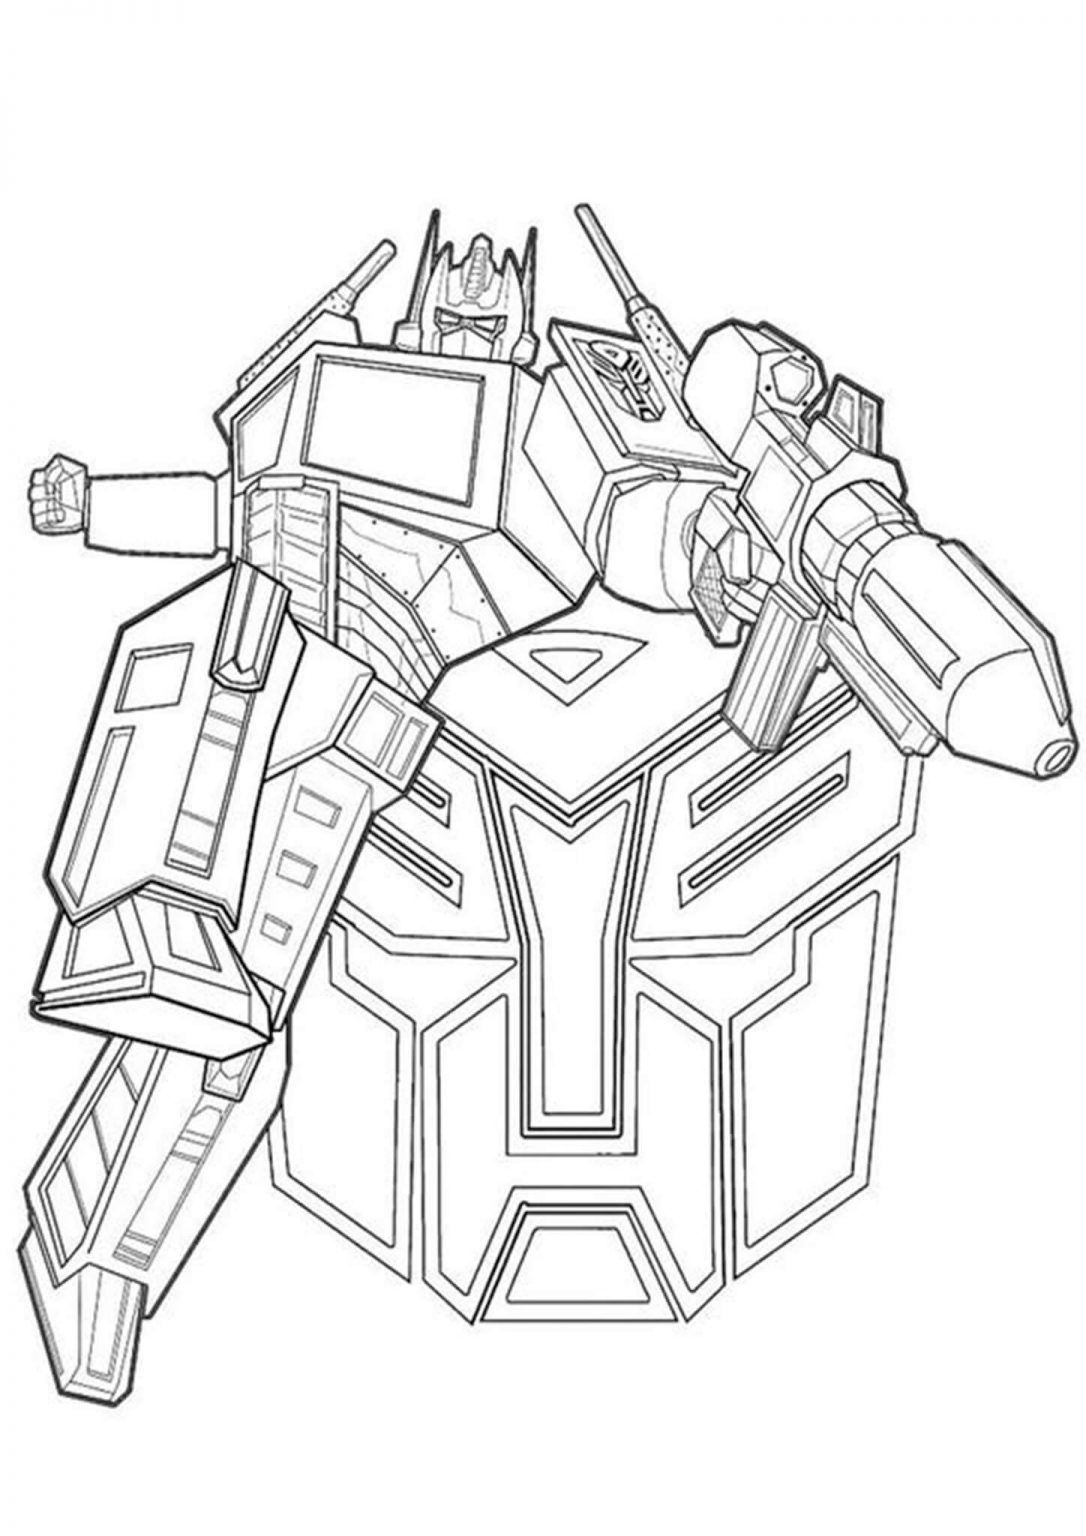 Free easy to print transformers coloring pages transformers coloring pages disney coloring pages cartoon coloring pages